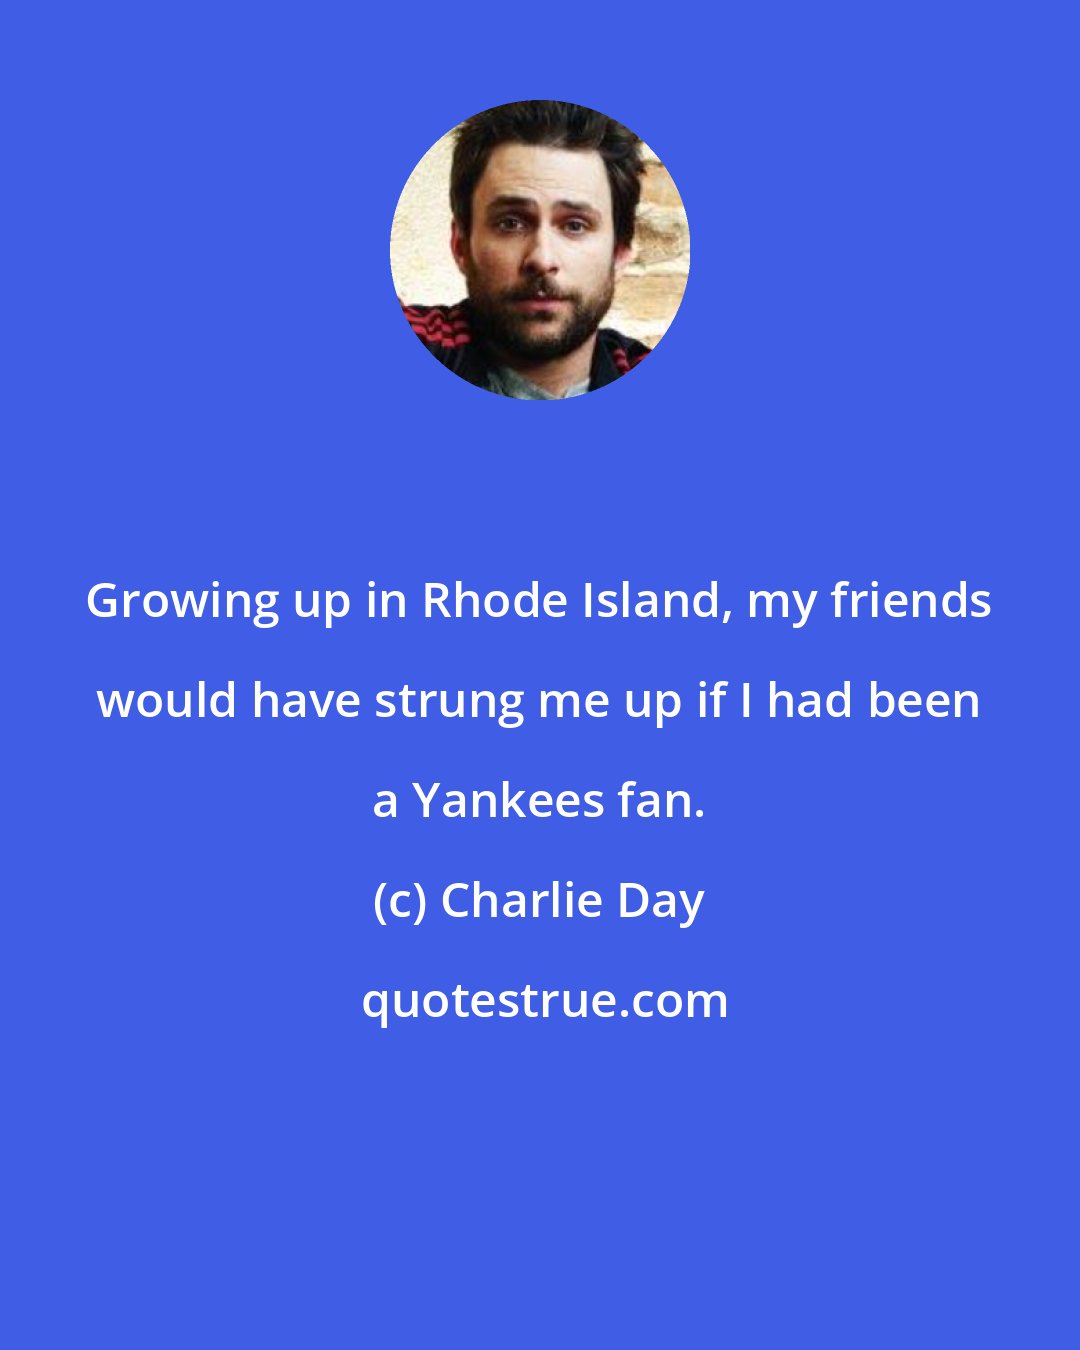 Charlie Day: Growing up in Rhode Island, my friends would have strung me up if I had been a Yankees fan.